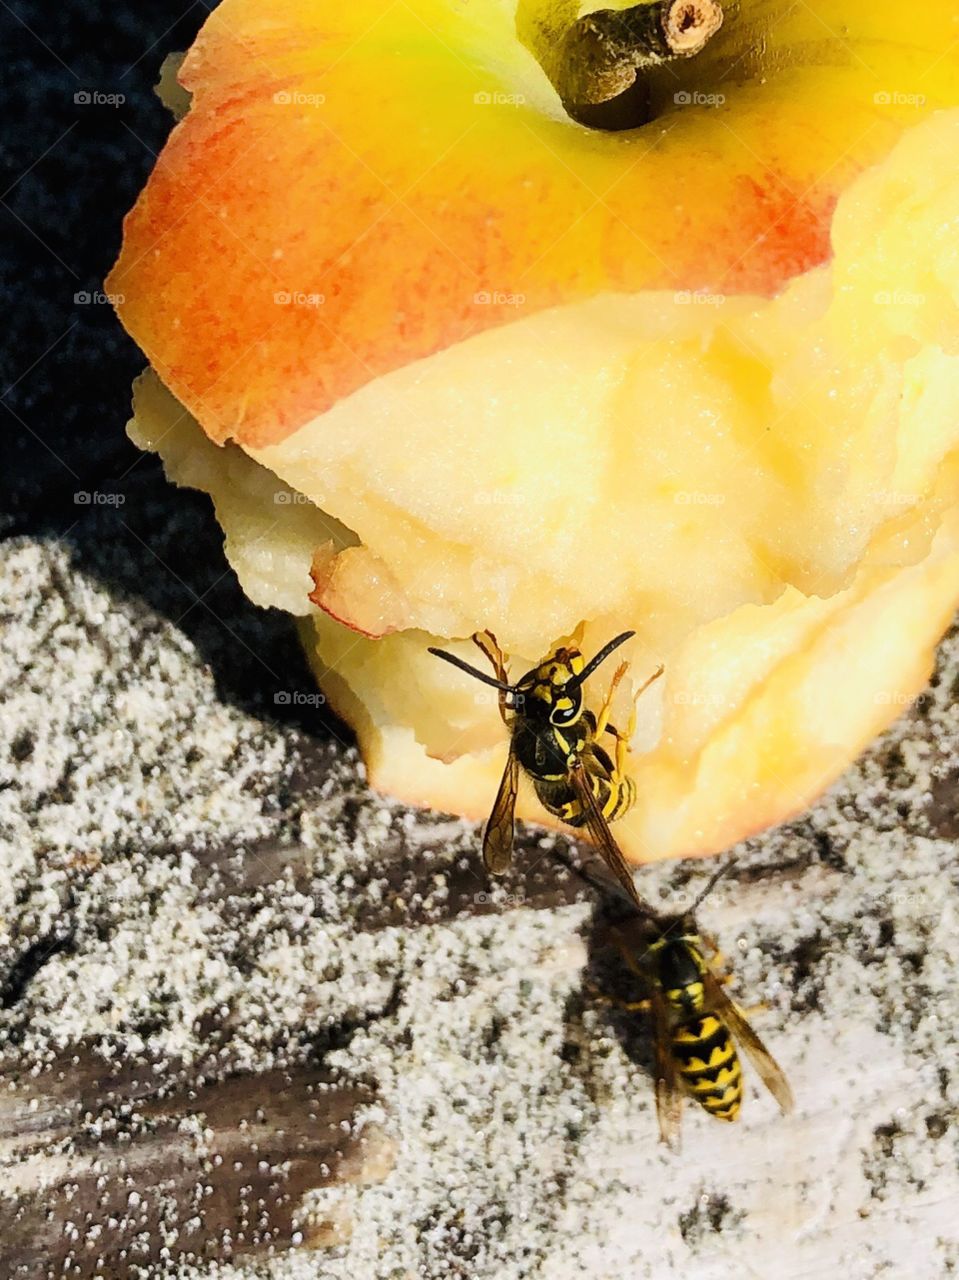 Apple Core Insects At The Beach 